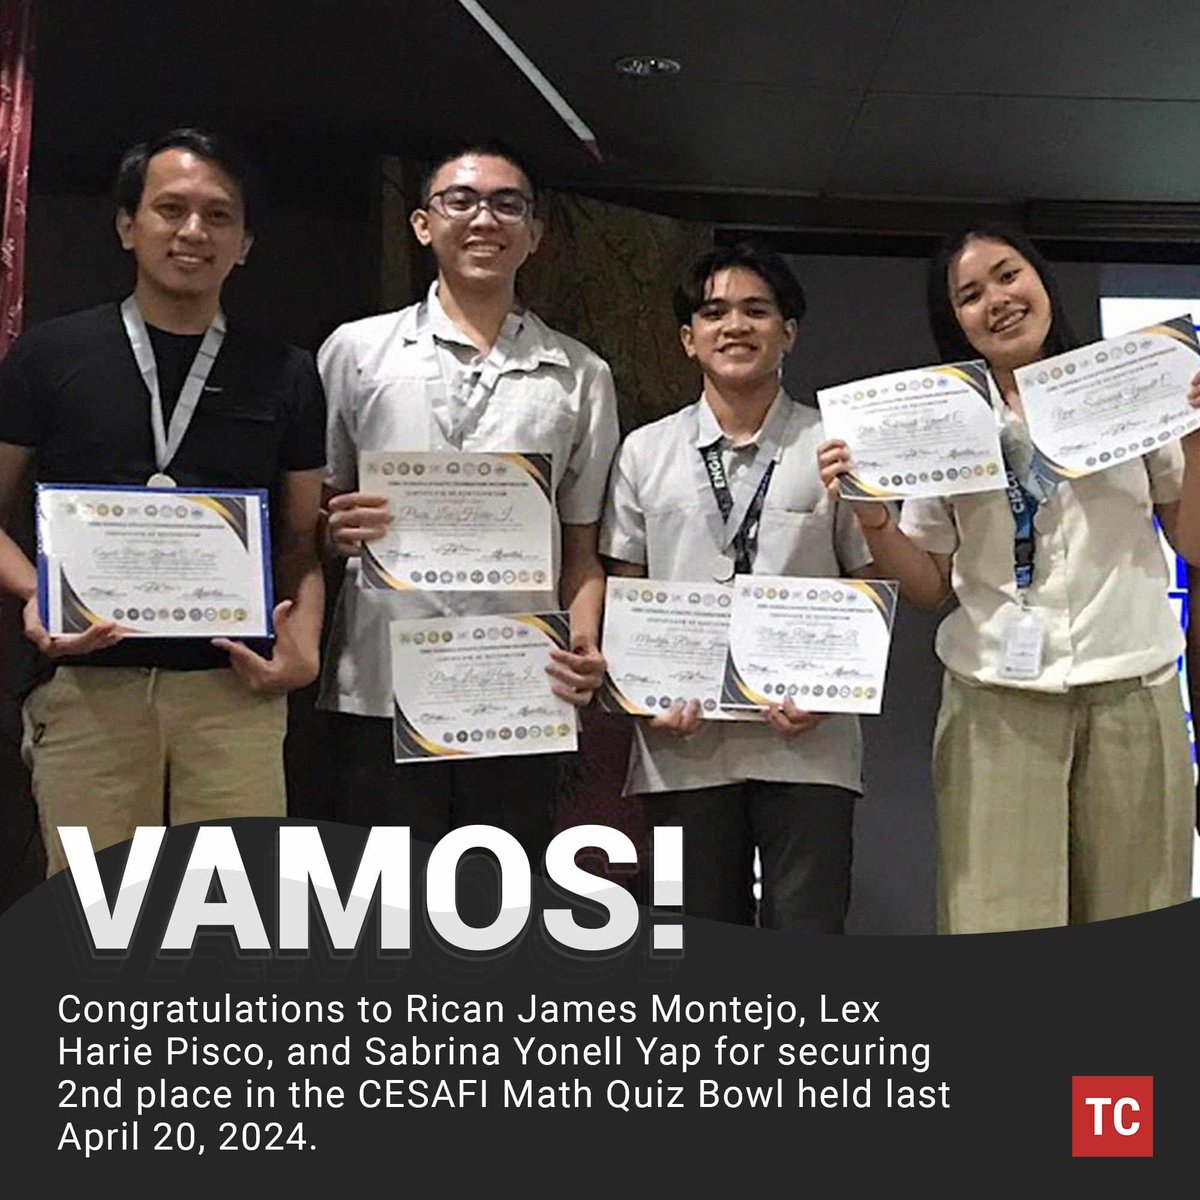 VAMOS: Congratulations to Rican James Montejo from BS Civil Engineering, Lex Harie Pisco from BS Applied Mathematics, and Sabrina Yonell Yap from BS Computer Science for securing 2nd place in the CESAFI Math Quiz Bowl held on April 20, 2024.

Read more: facebook.com/share/p/cKGRH1…